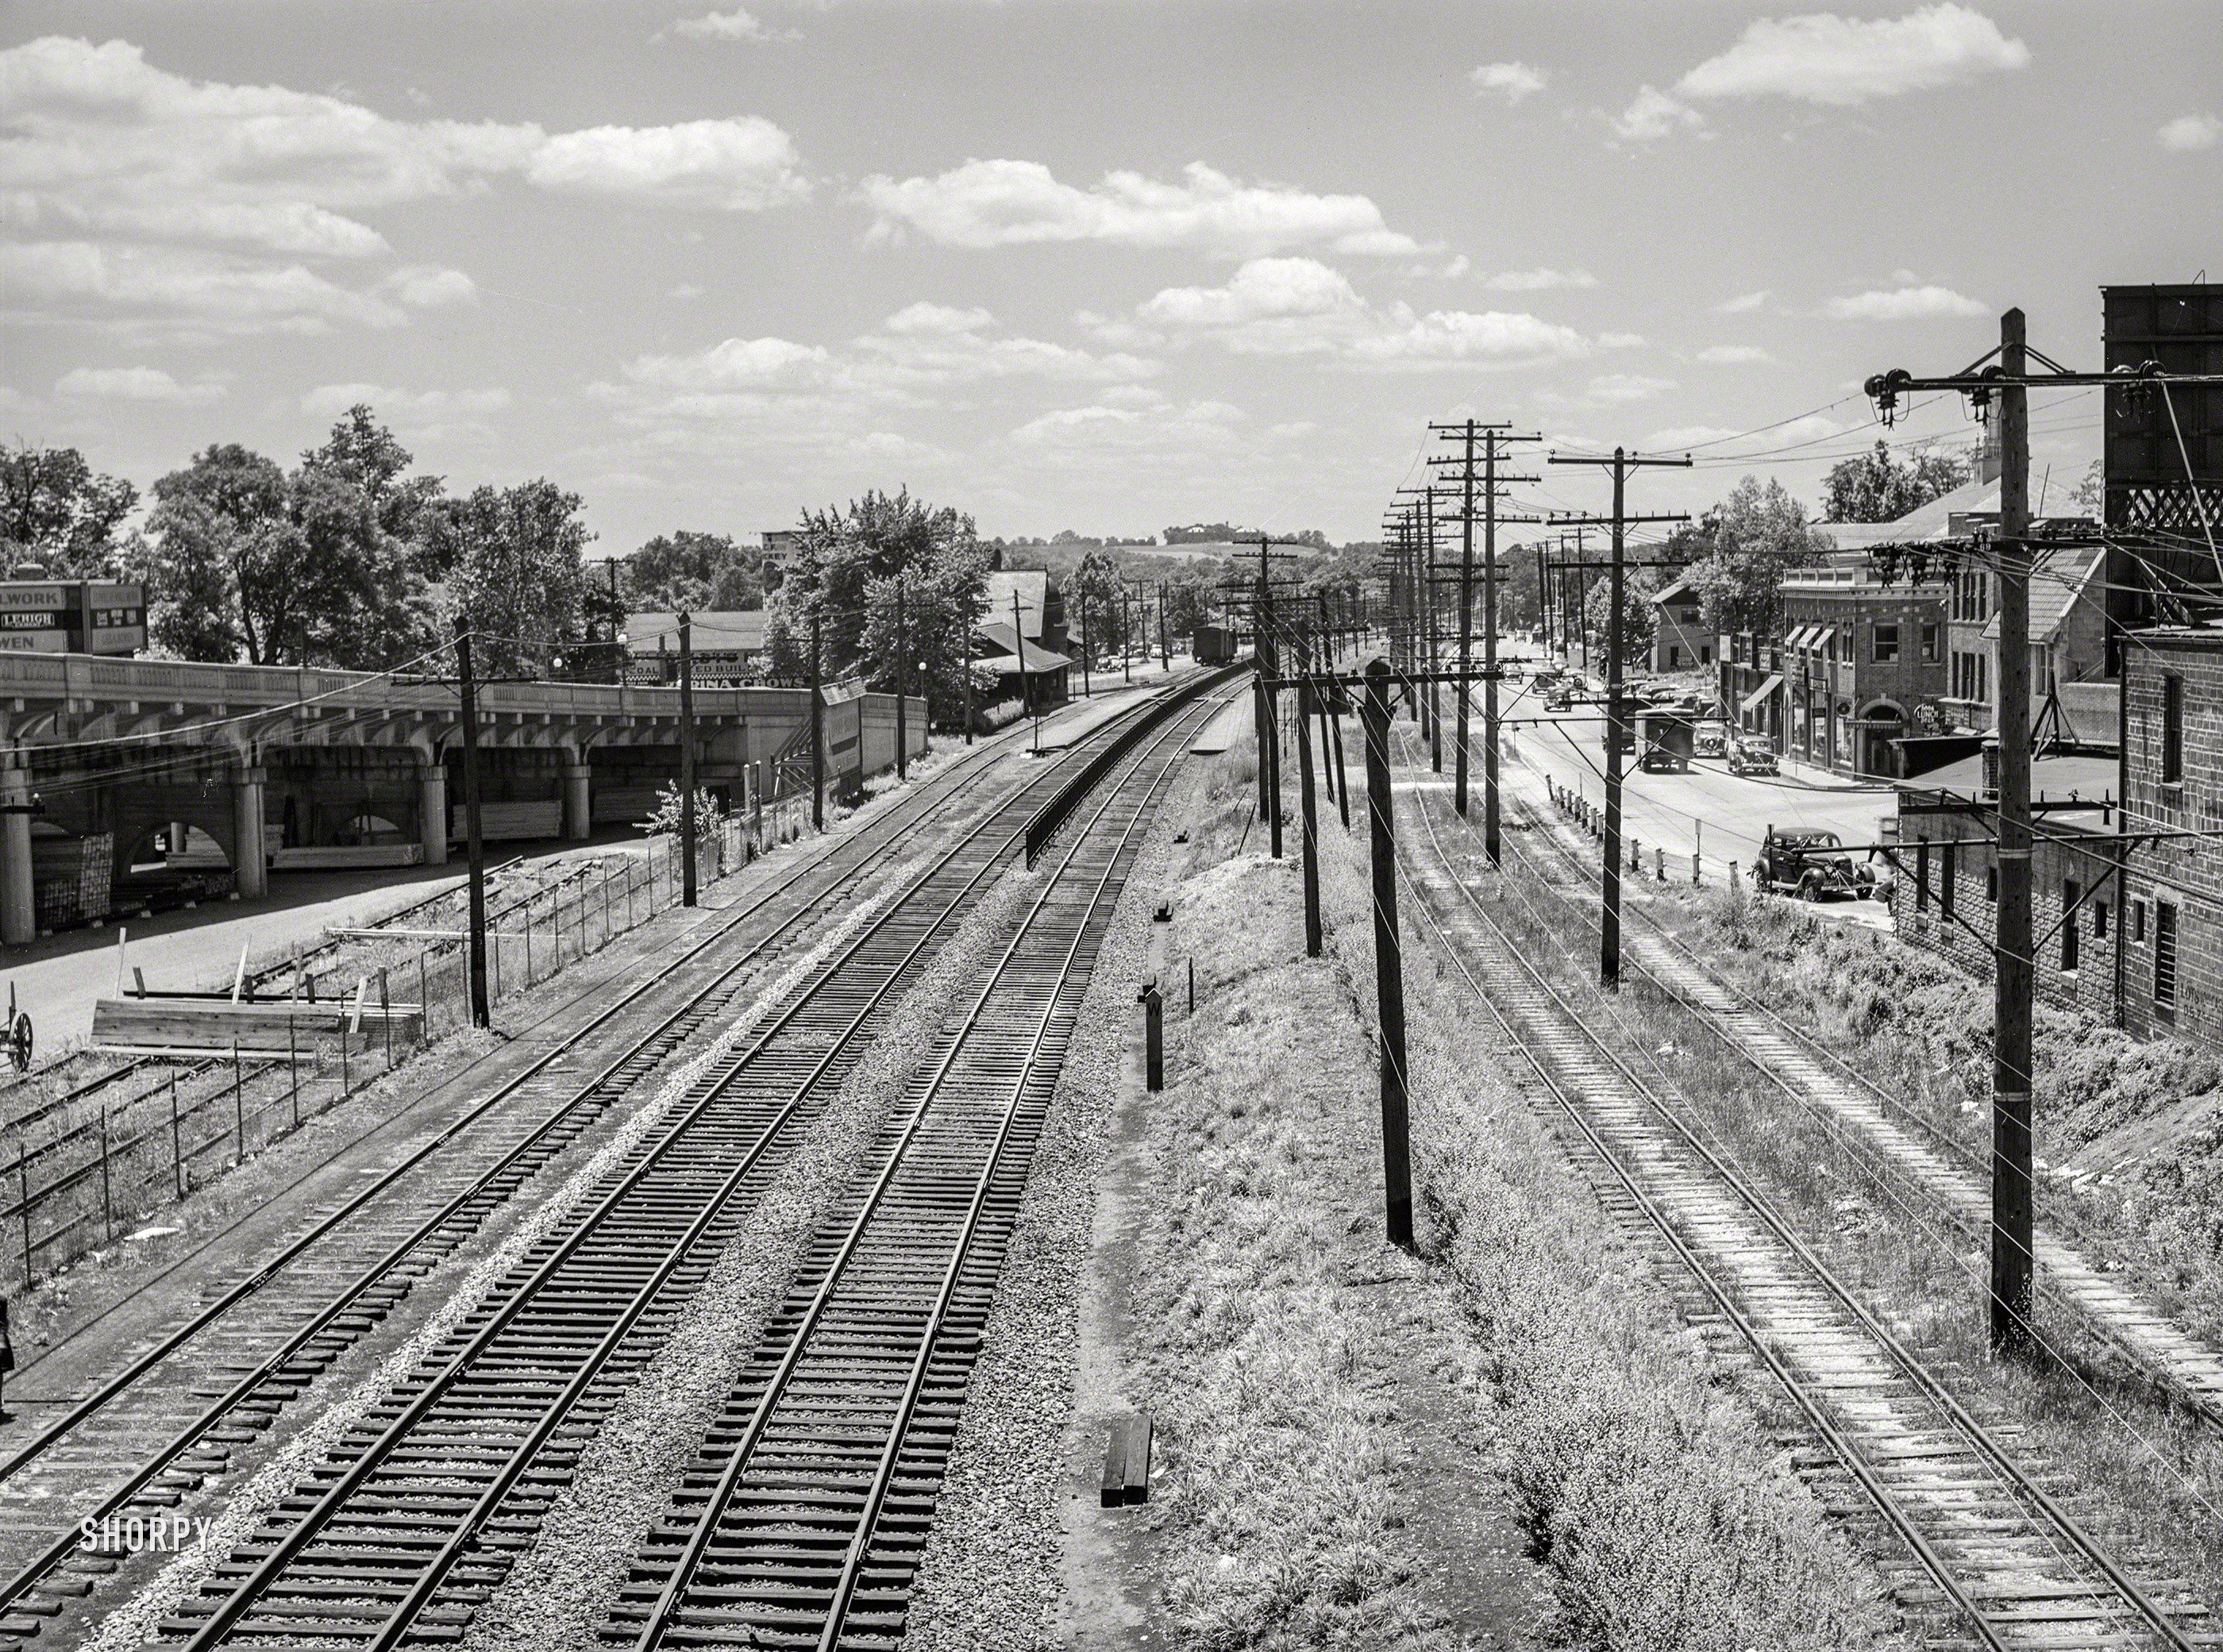 June 1940. "Railroad tracks along U.S. Route 1 at Hyattsville, Maryland." Acetate negative by Jack Delano for the Farm Security Administration. View full size.